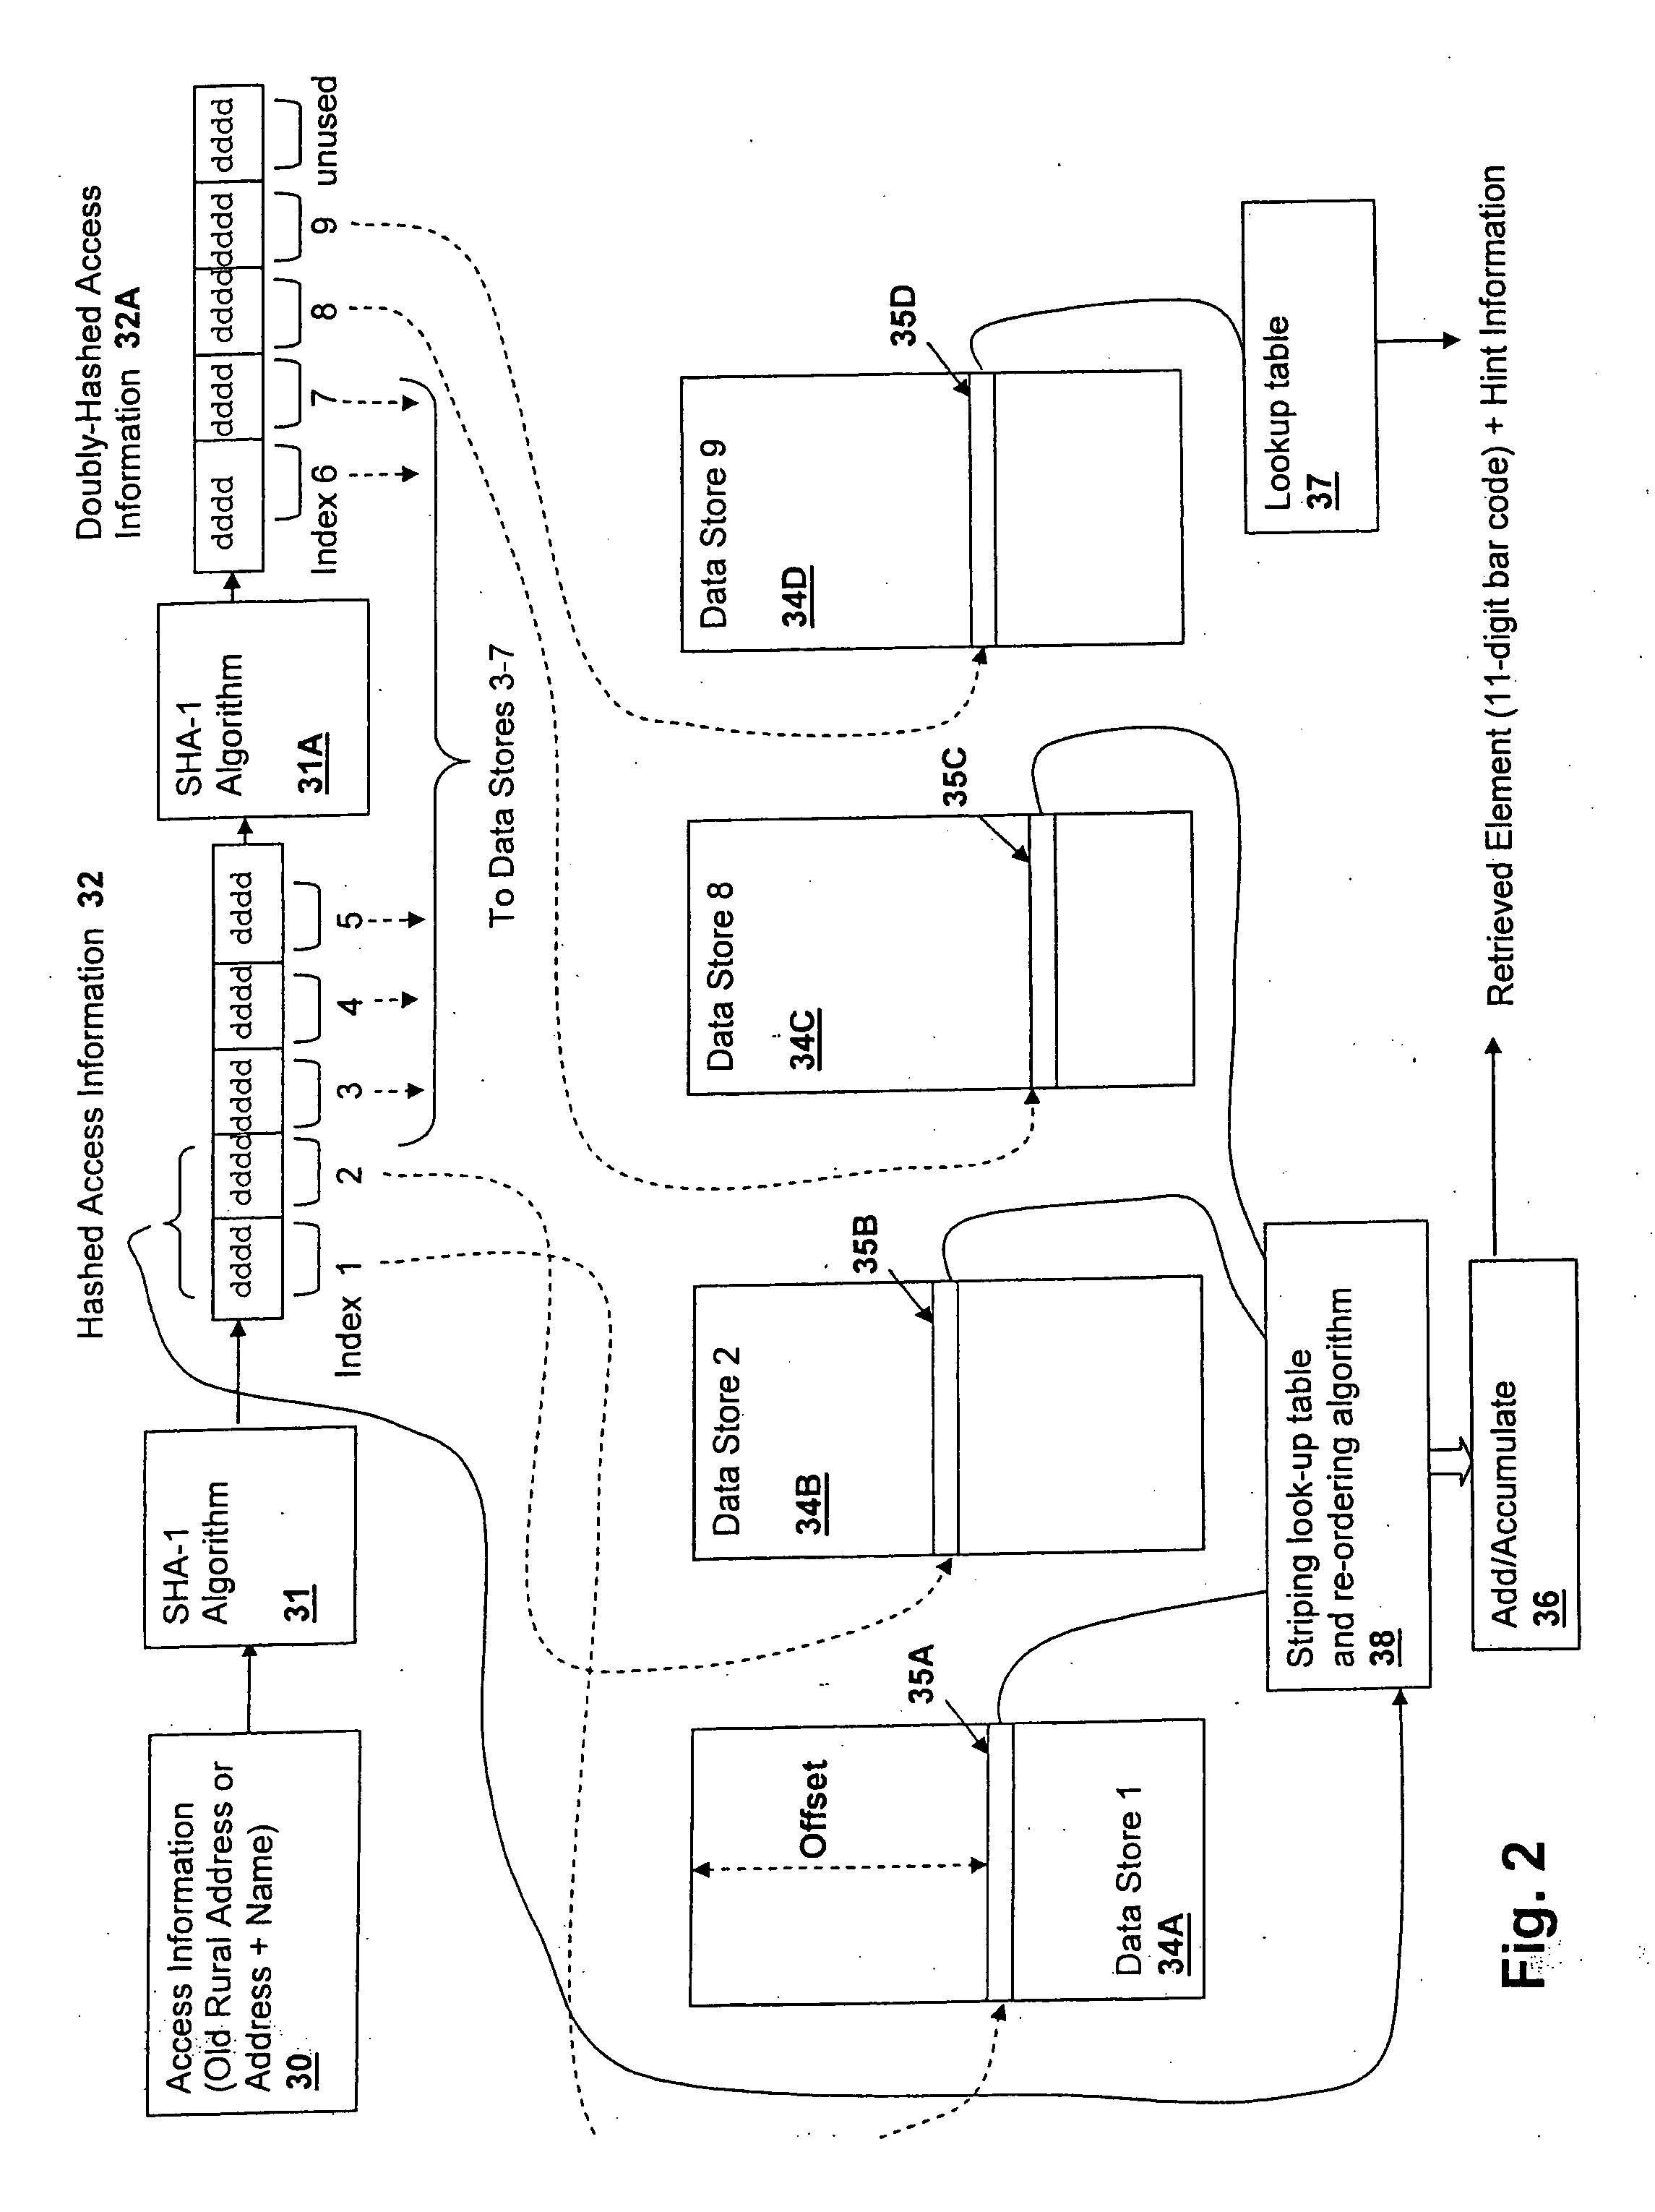 Method and system for storing and retrieving data using hash-accessed multiple data stores